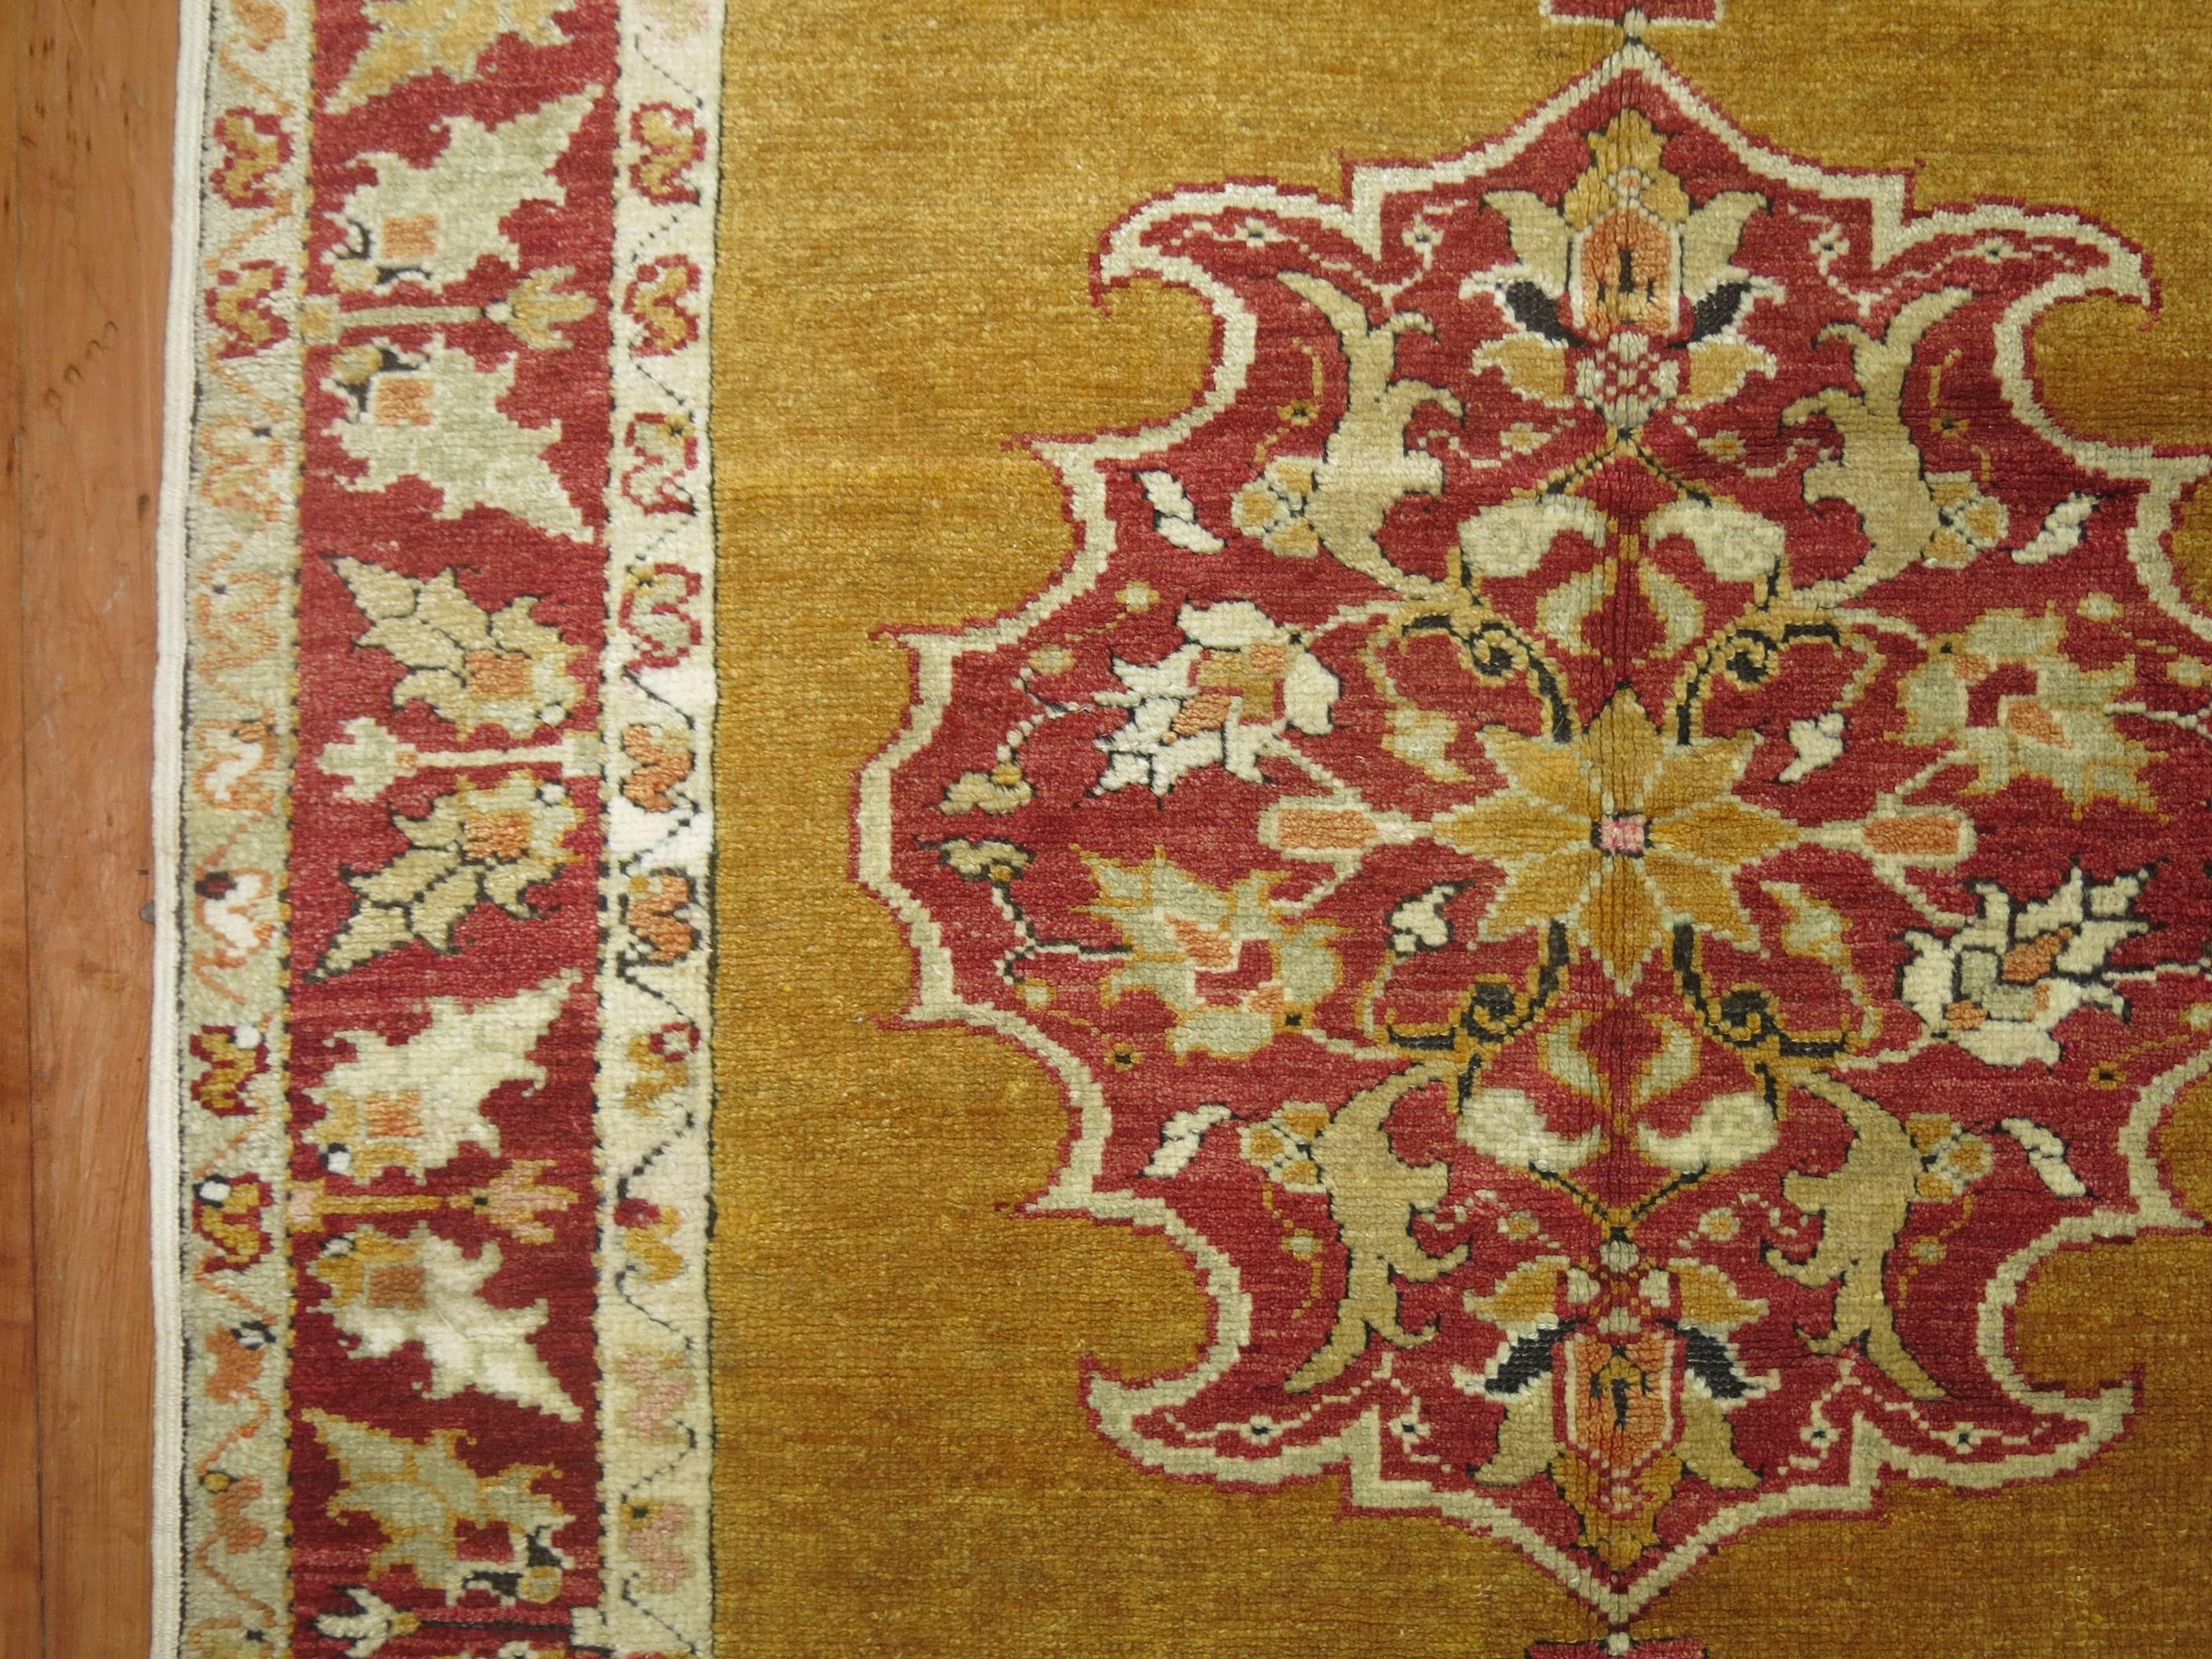 Exquisite Turkish Melas rug with a mustard colored ground, deep red border and central medallion.

3'3'' x 5'6''